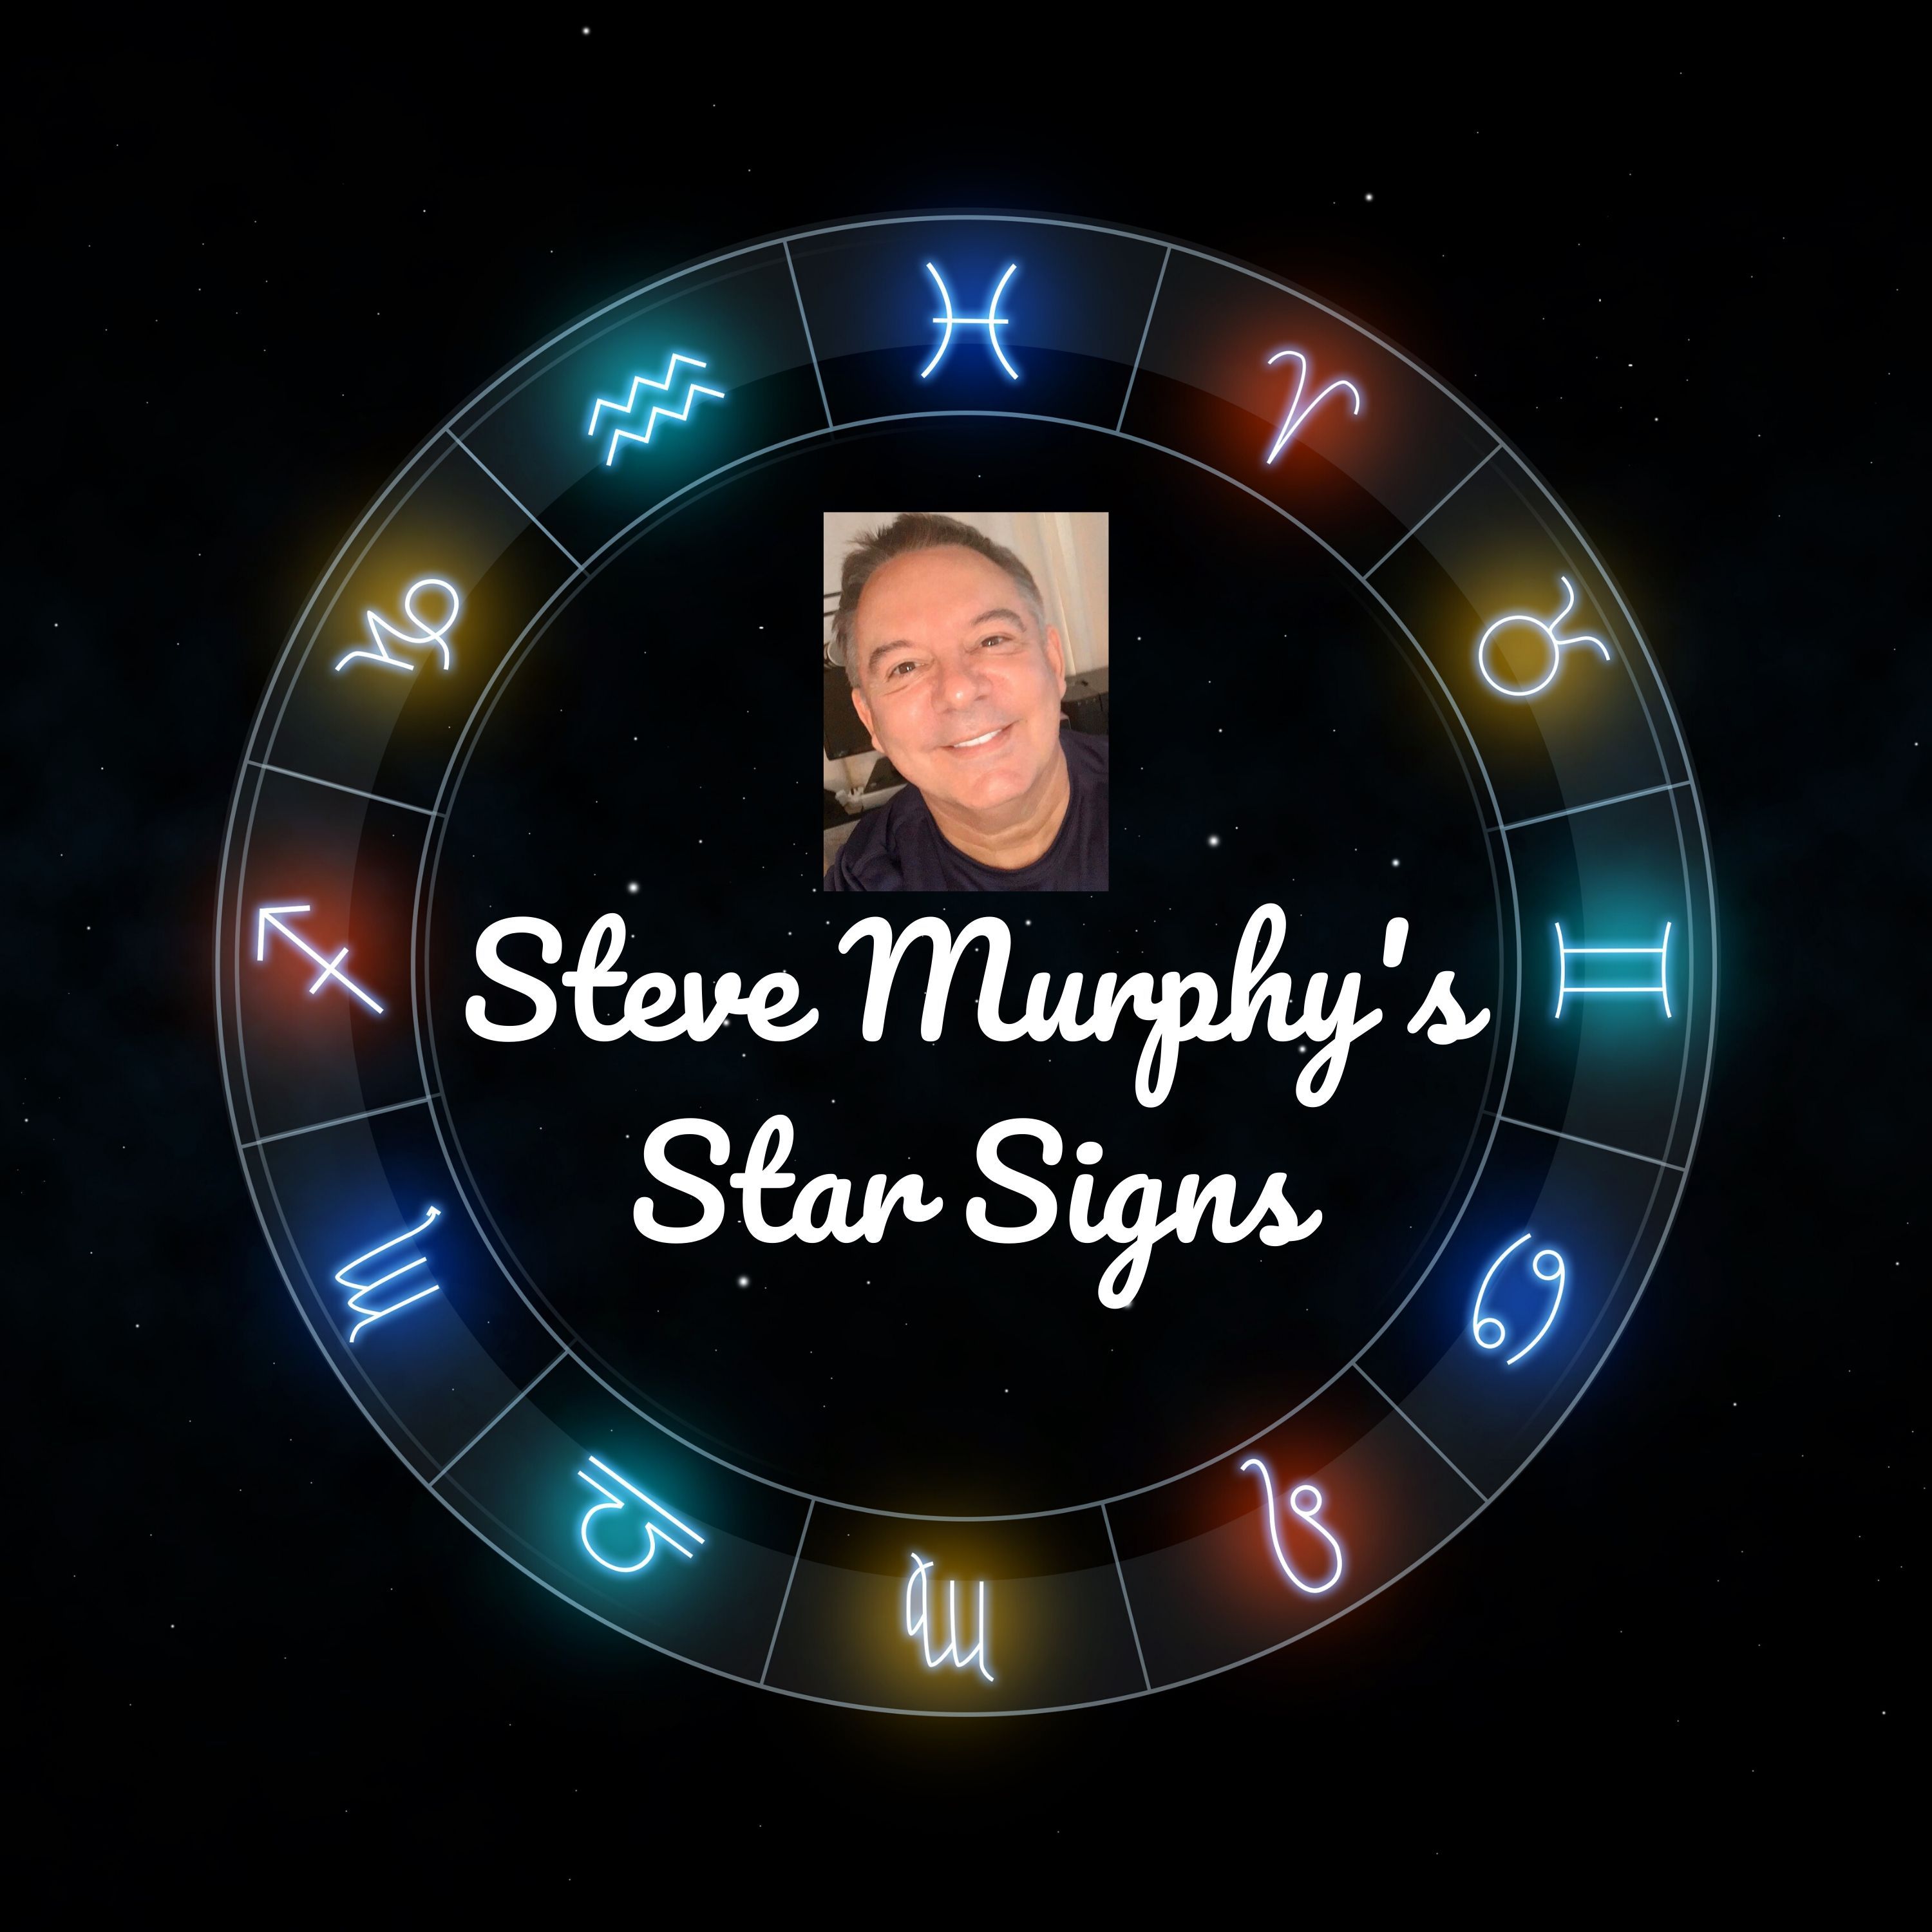 You Star Signs Report wc 14th Sept 2020 - A New Moon Report